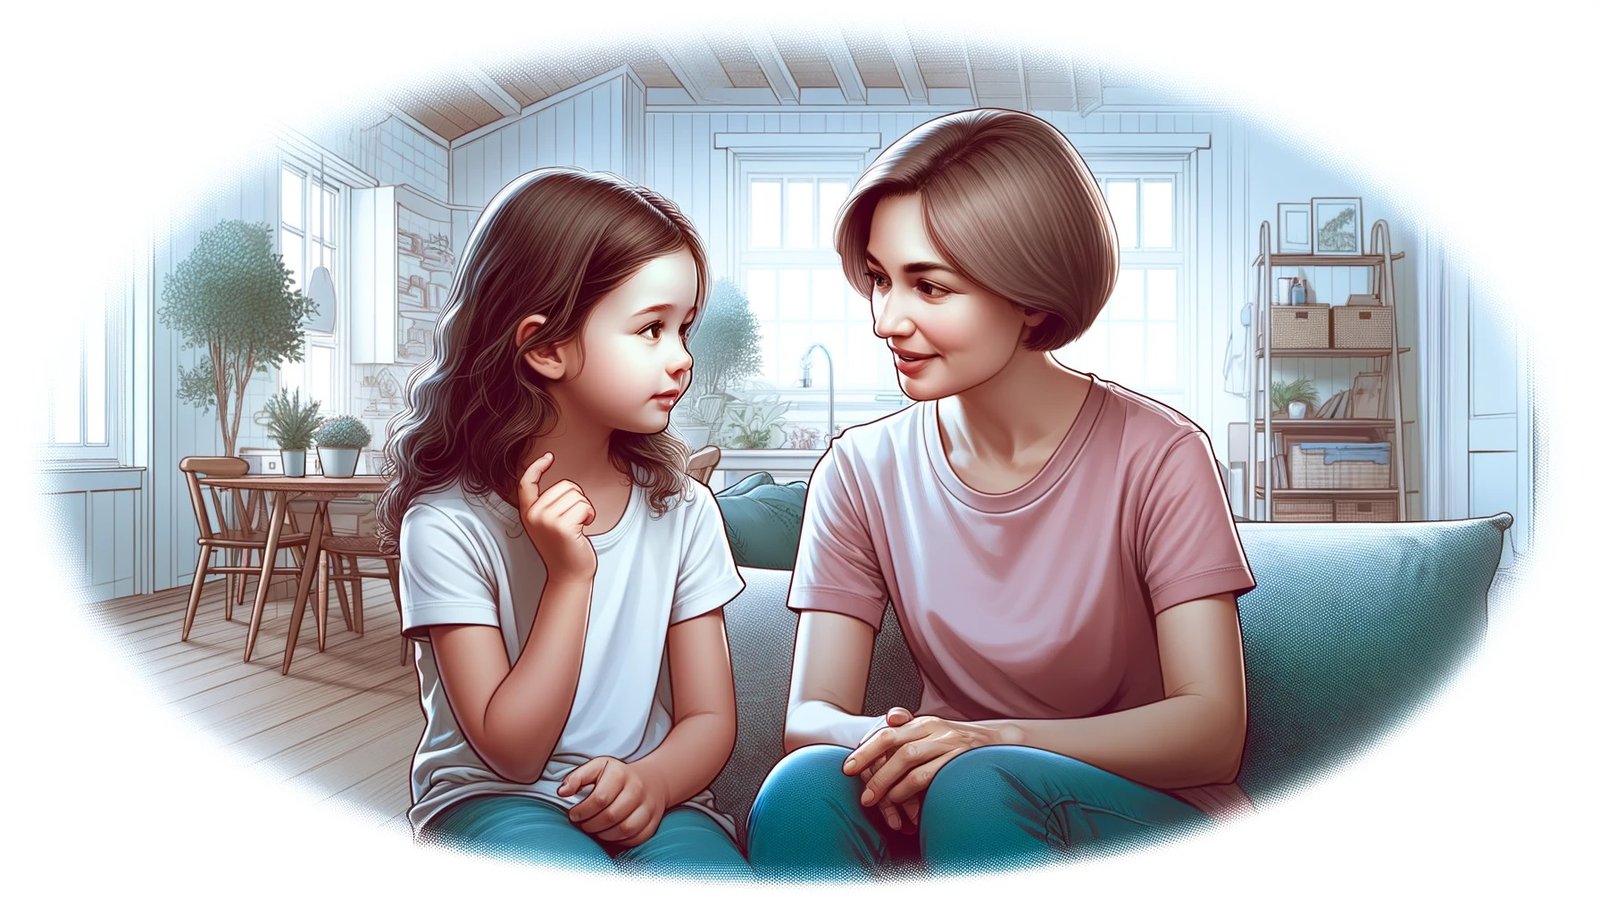 A mother speaking calmly to her young daughter as they sit on the couch.